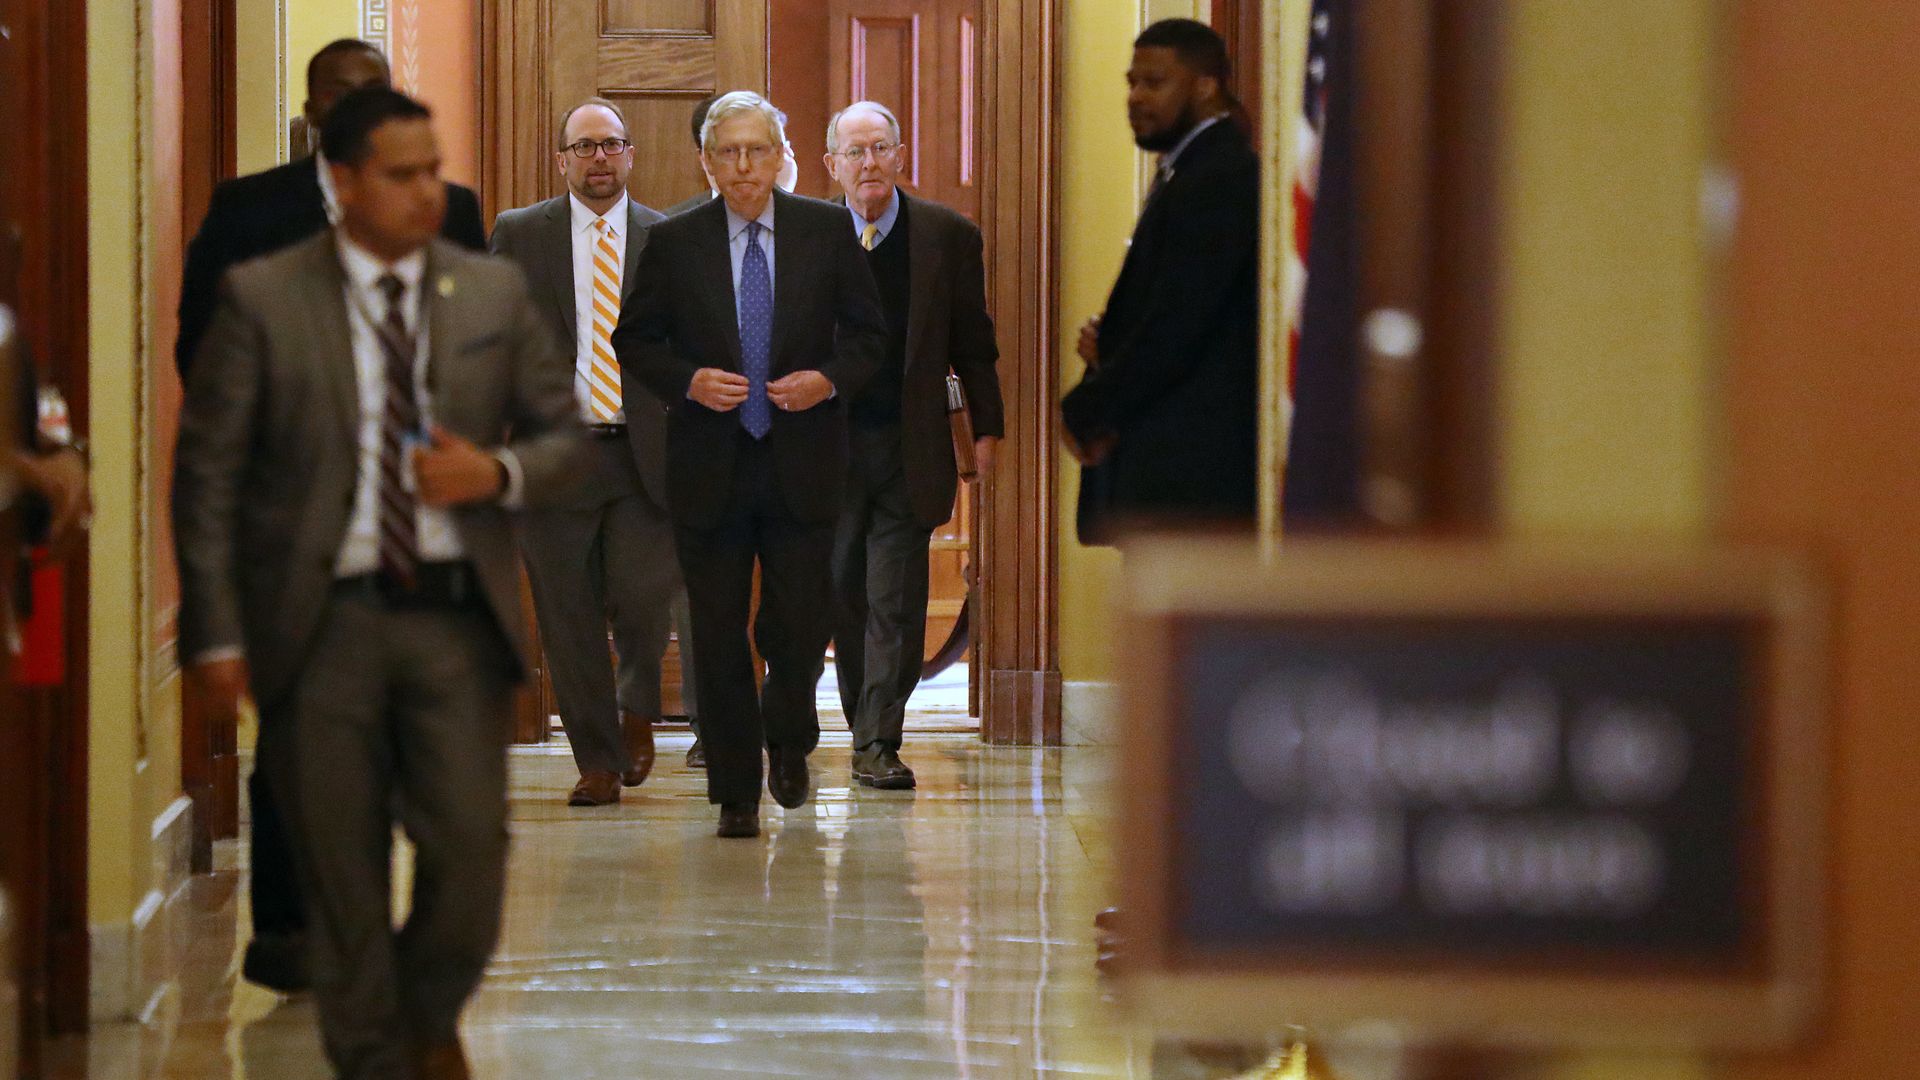 Senate Majority Leader Mitch McConnell (R-KY) (C) and Sen. Lamar Alexander (R-TN) (2nd R) leave a meeting